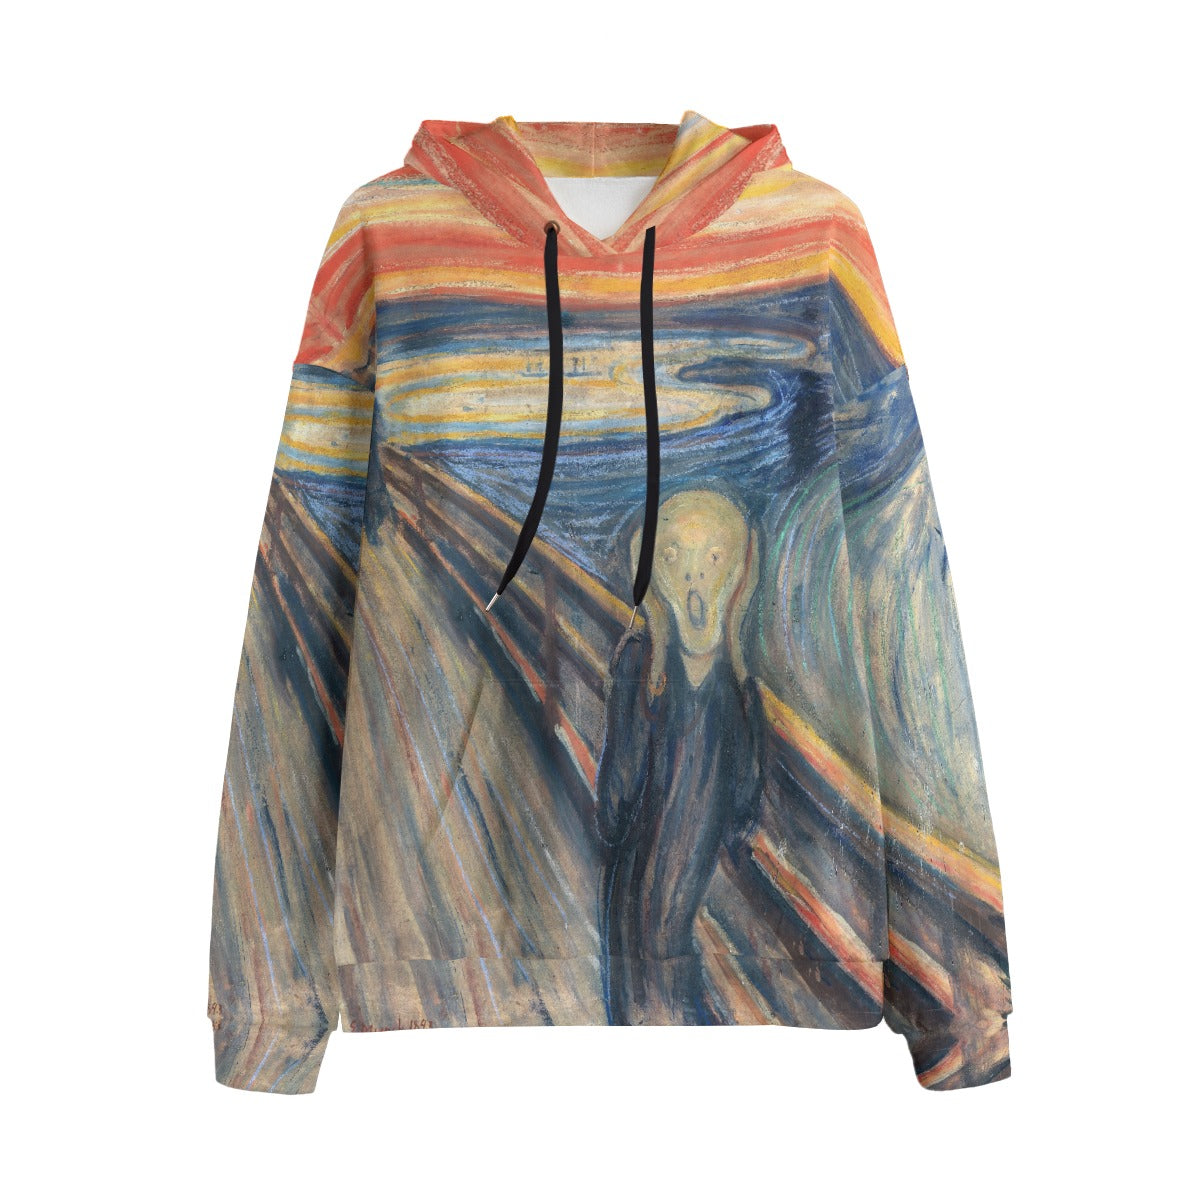 Vibrant hoodie featuring The Scream by Edvard Munch